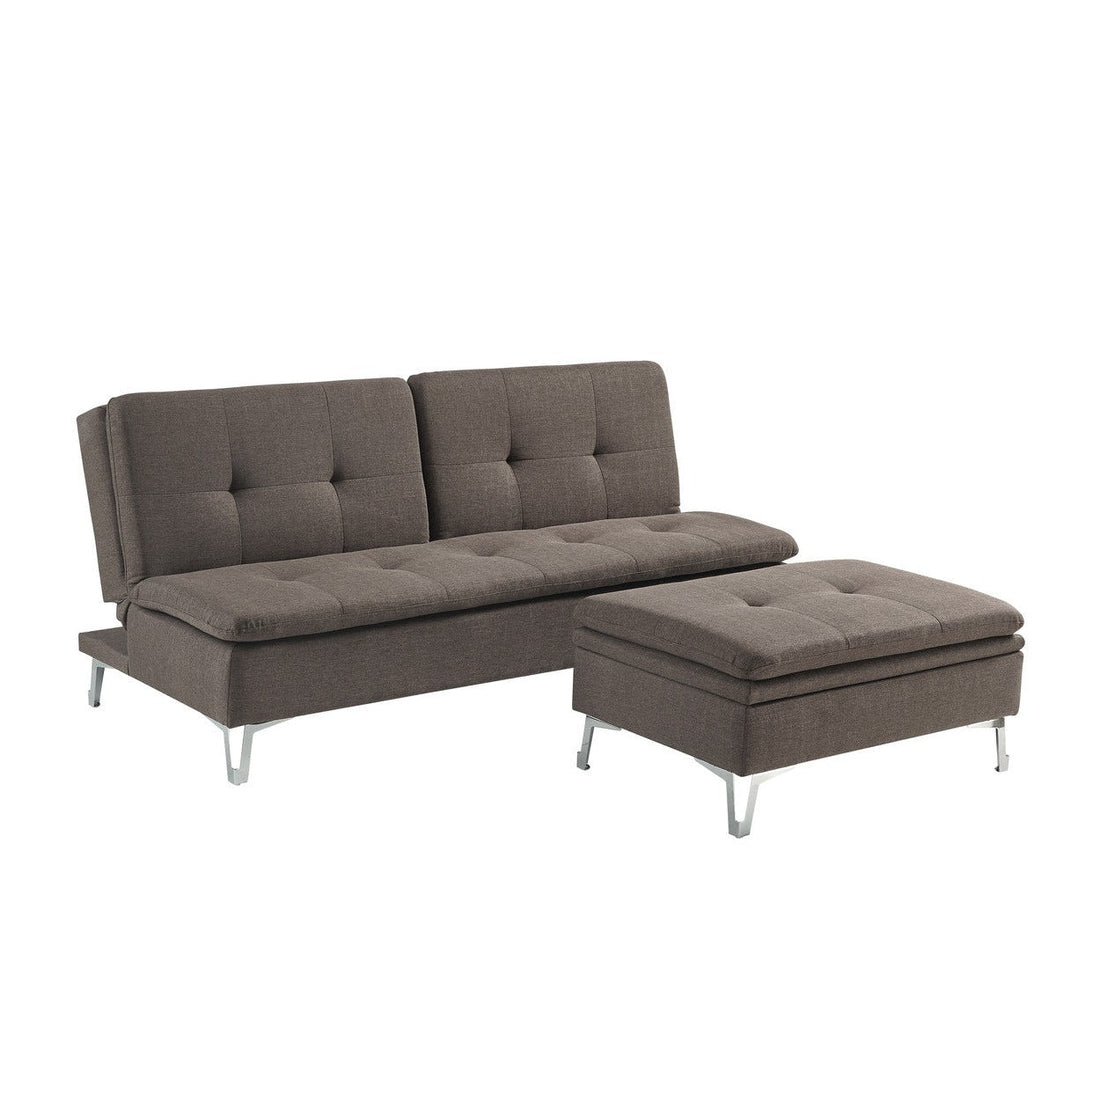 SOFA BED, CHOCOLATE 4WC-8764CH-3CL